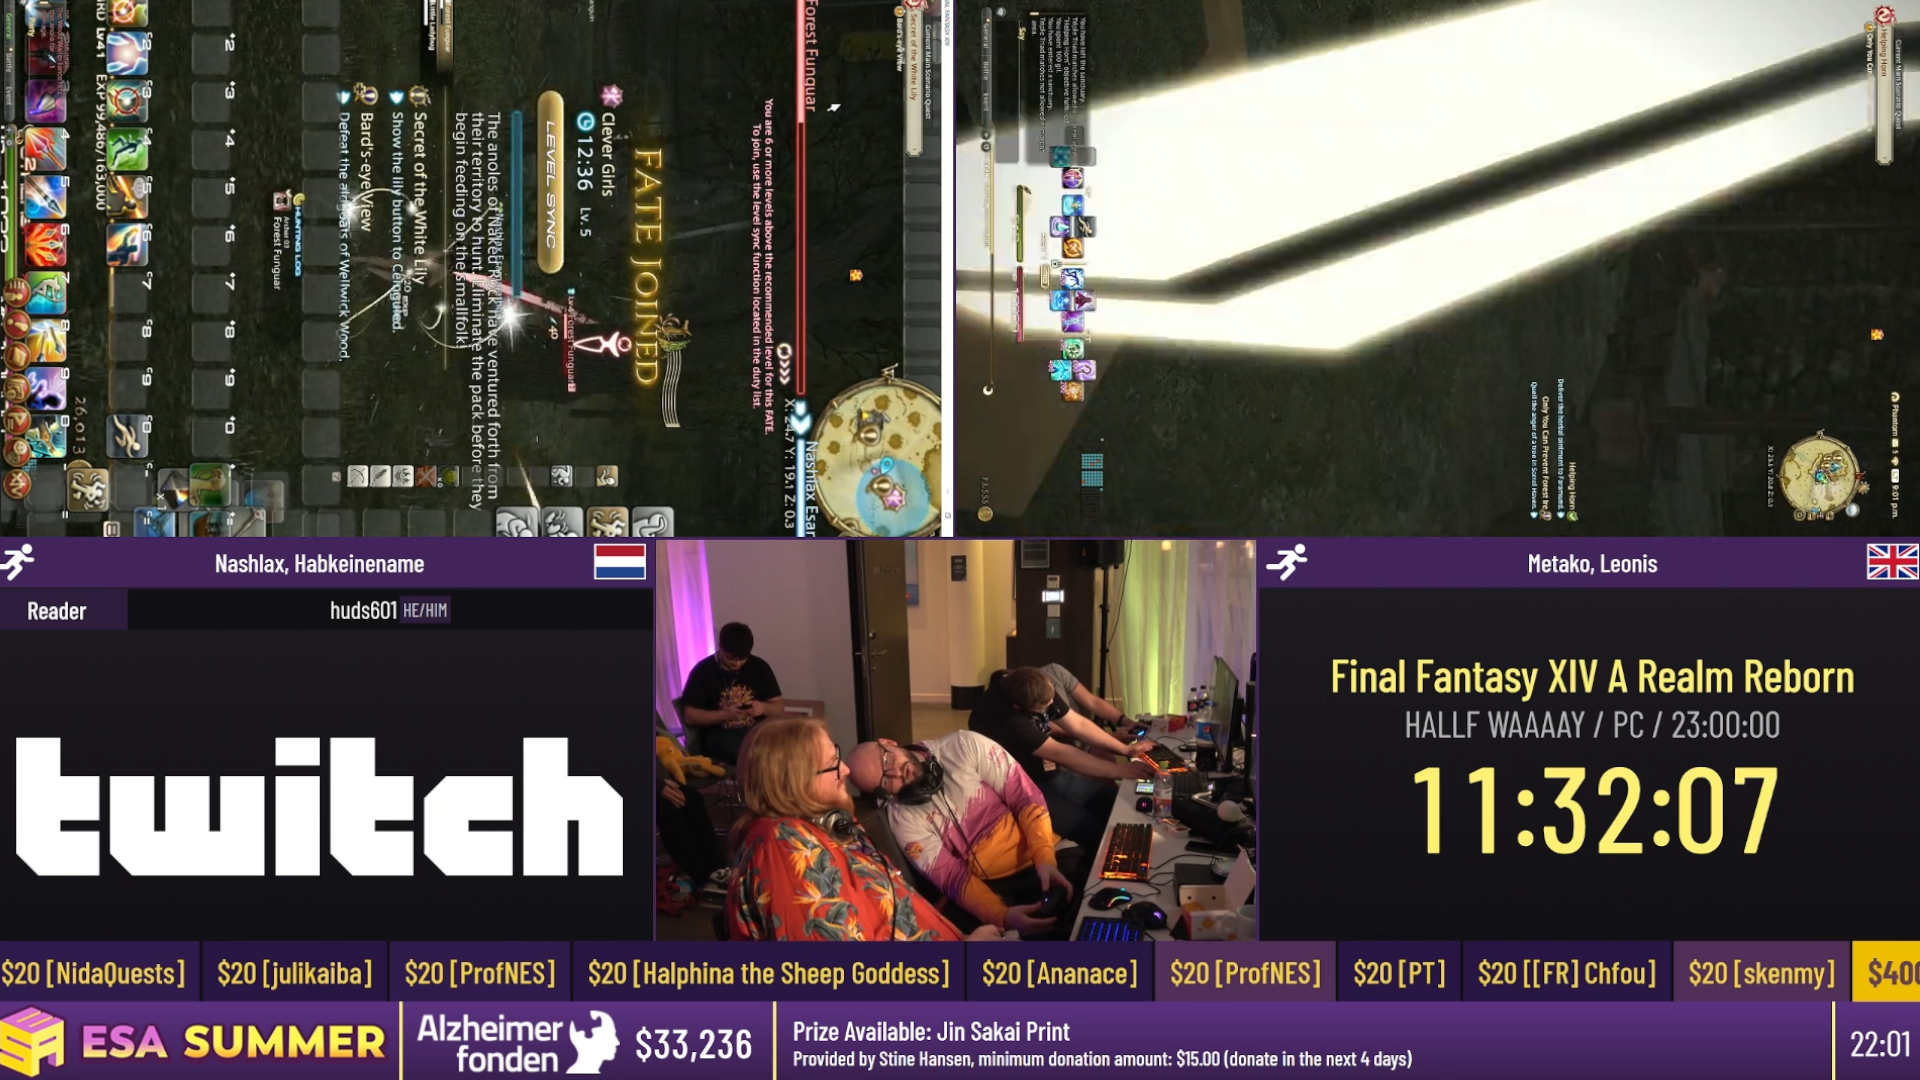 Two poor speedrunners from the European Speedrunner assembly are forced to (for a good cause) rotate their screens 90 degrees while trying to complete Final Fantasy 14.